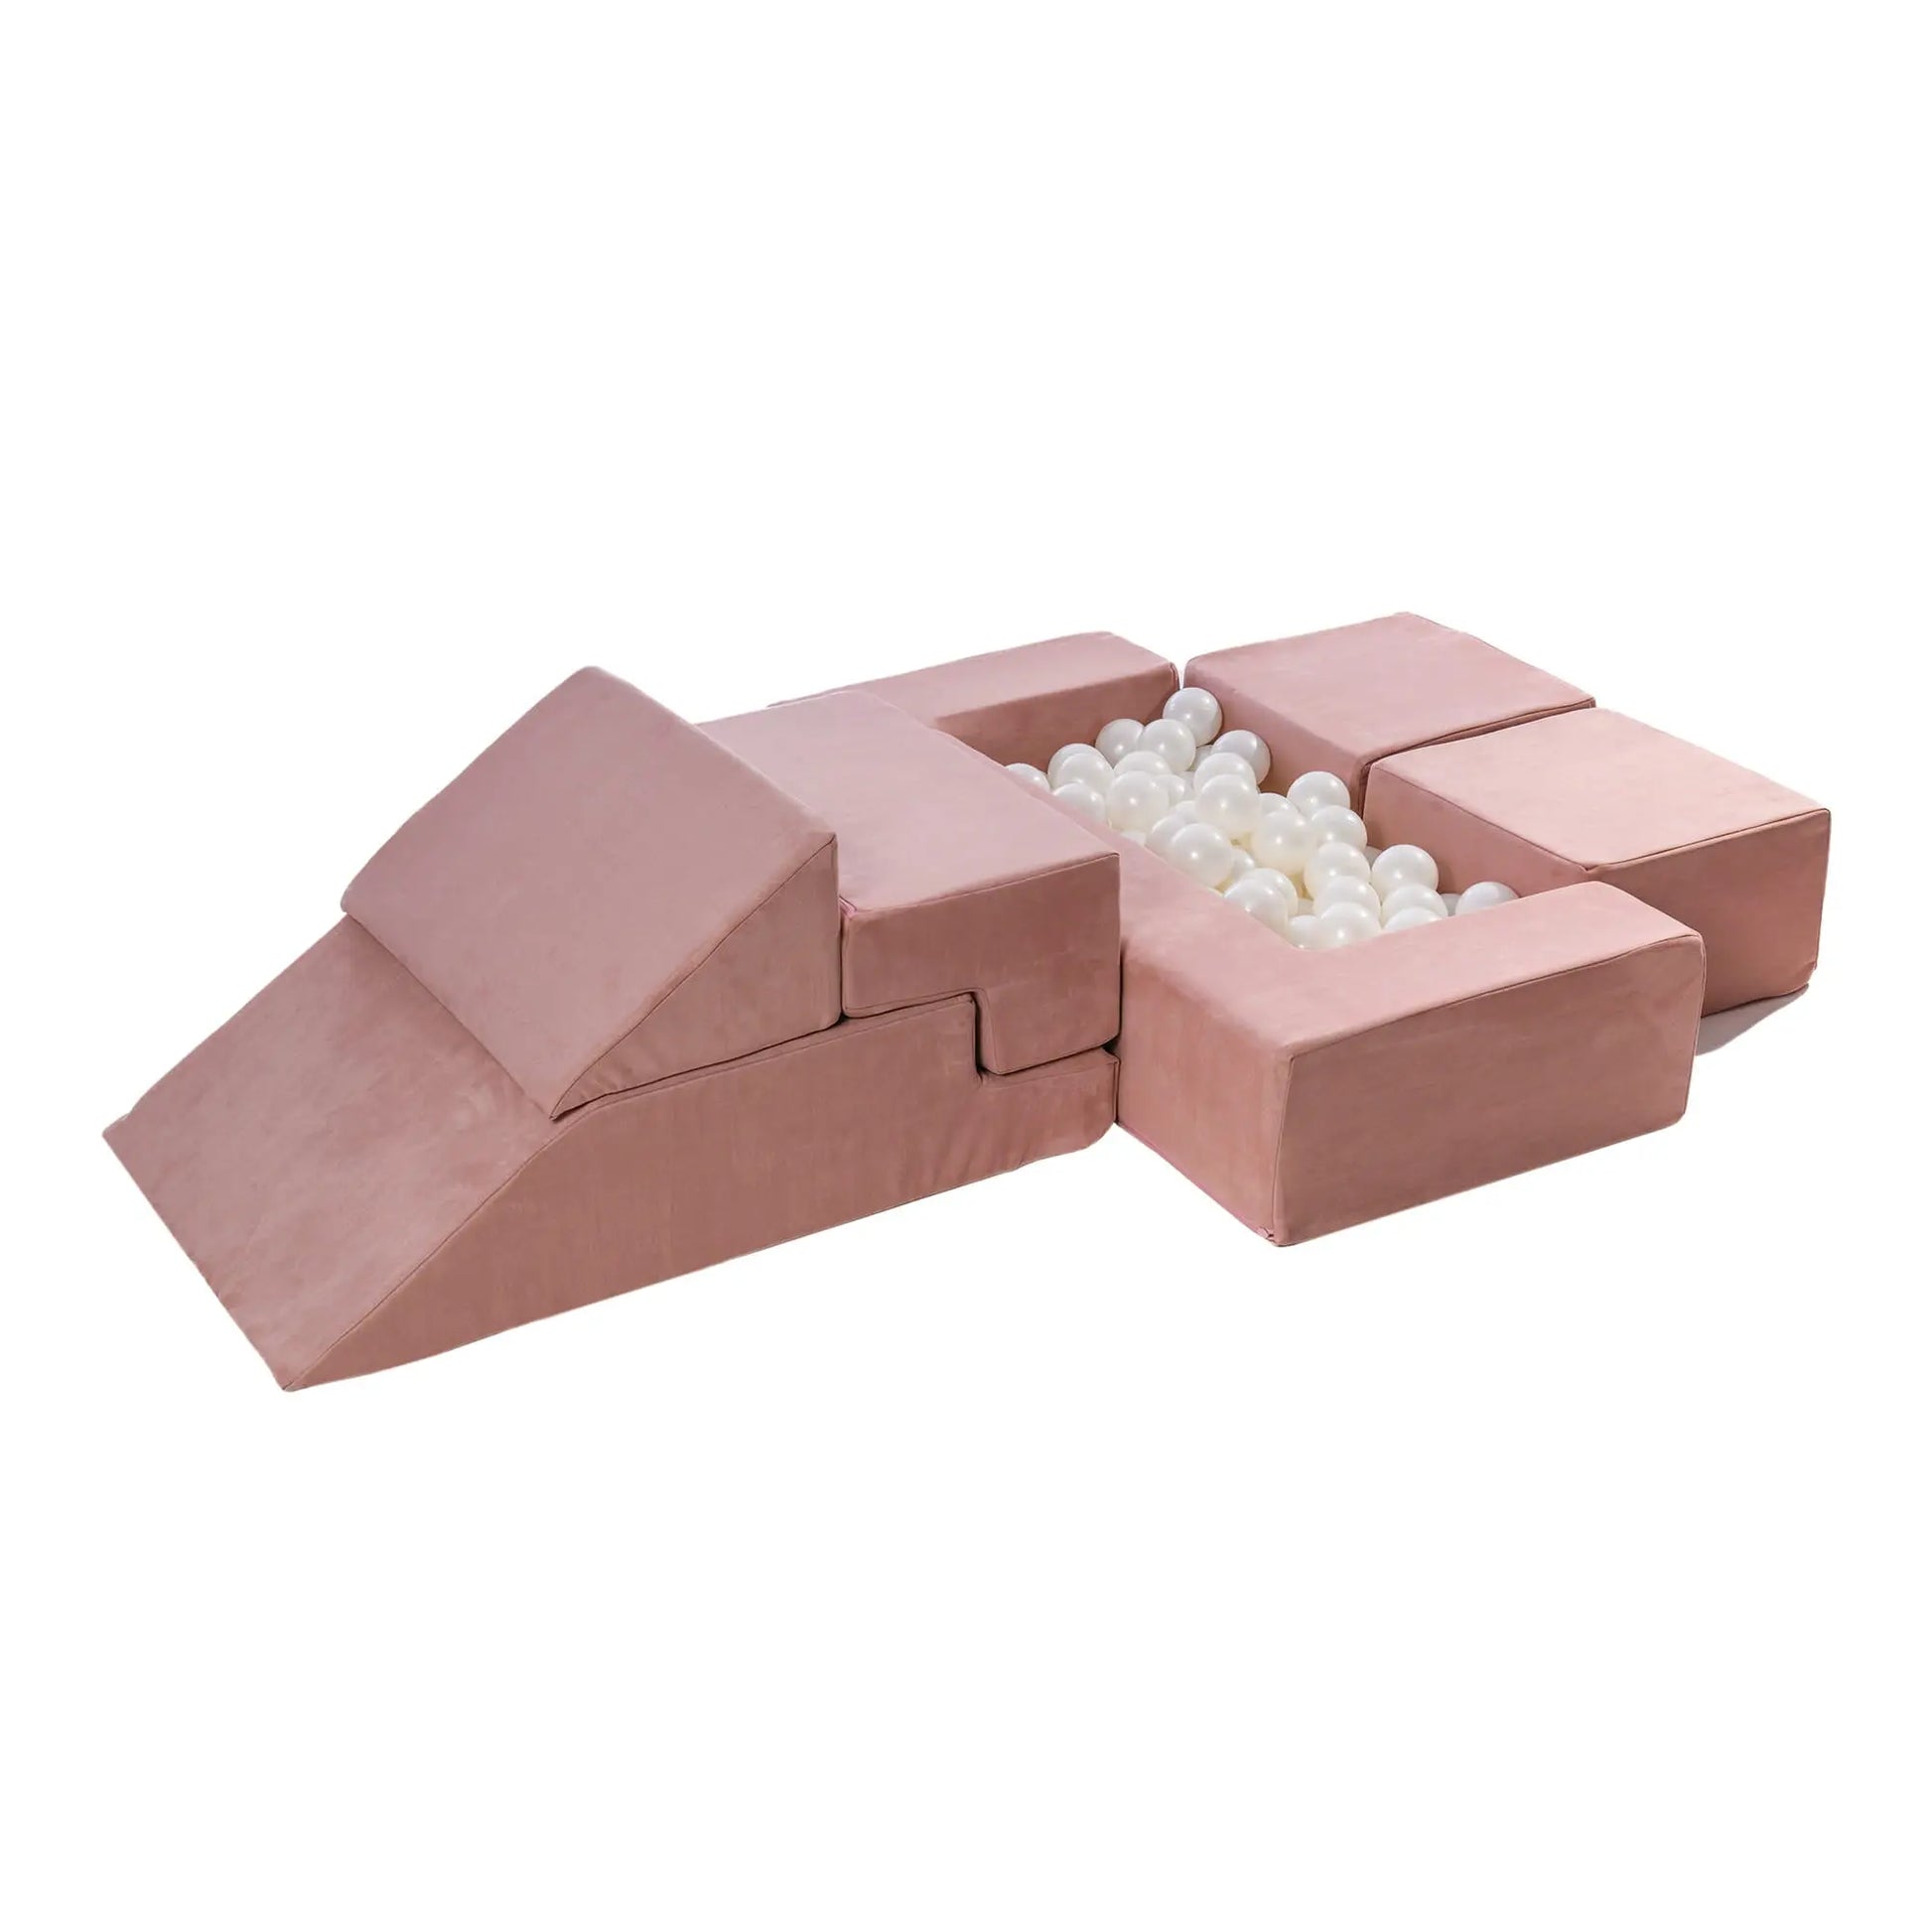 Velvet Bricks Set - Multifunctional Playground for Children - Pink: Soft pink box with white balls, ideal for safe, creative play and motor skill development. Educational and versatile.